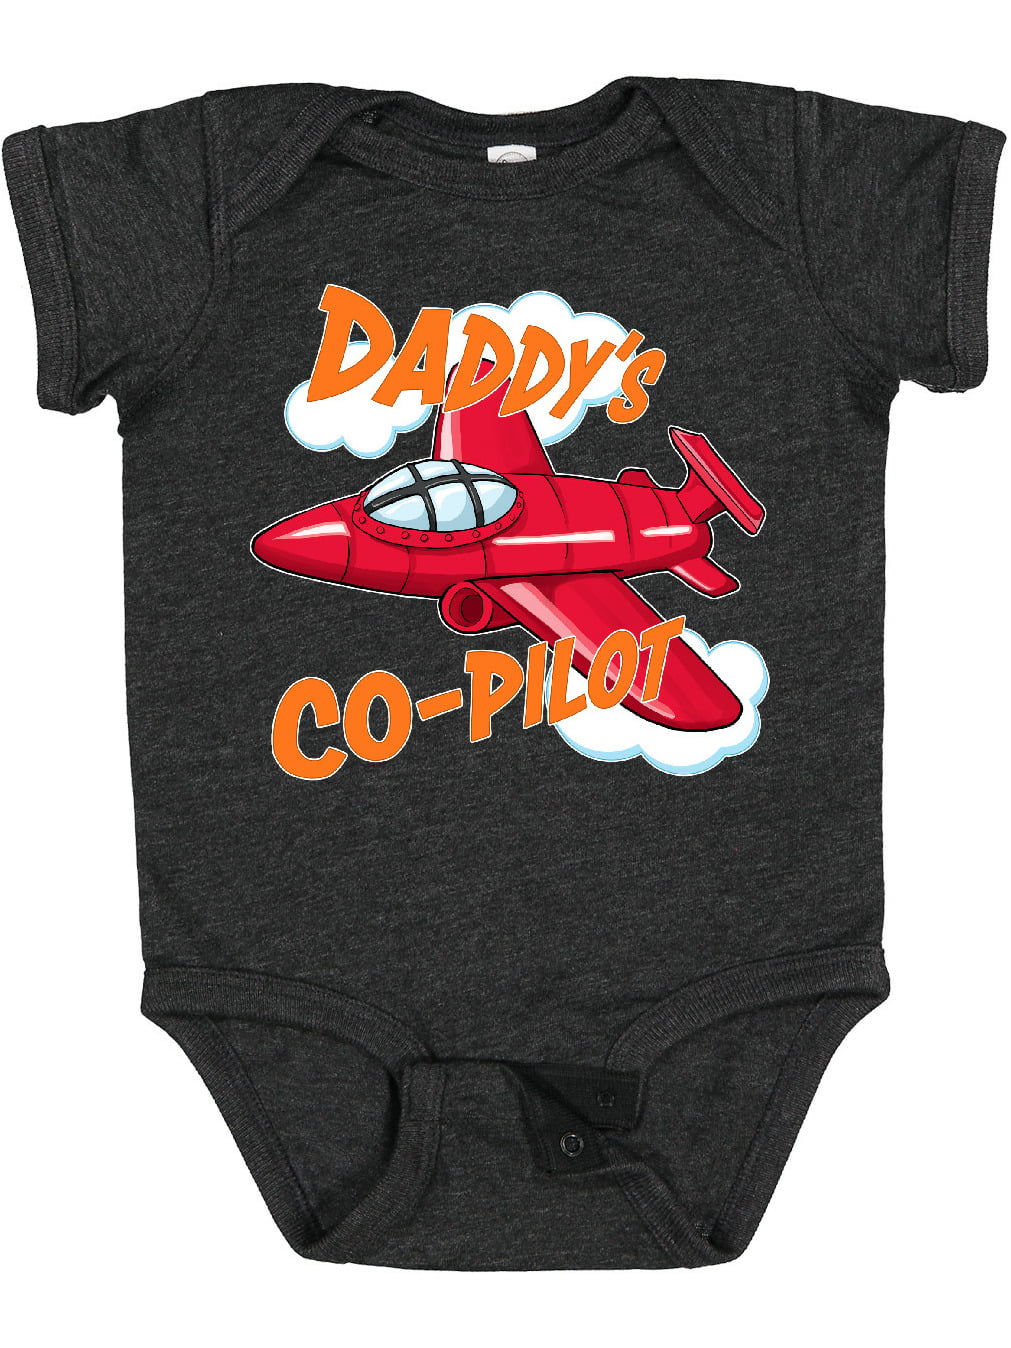 Daddys Co-Pilot Baby Clothes Sleeveless Novelty Funny Infant Summer Romper Gift for Baby